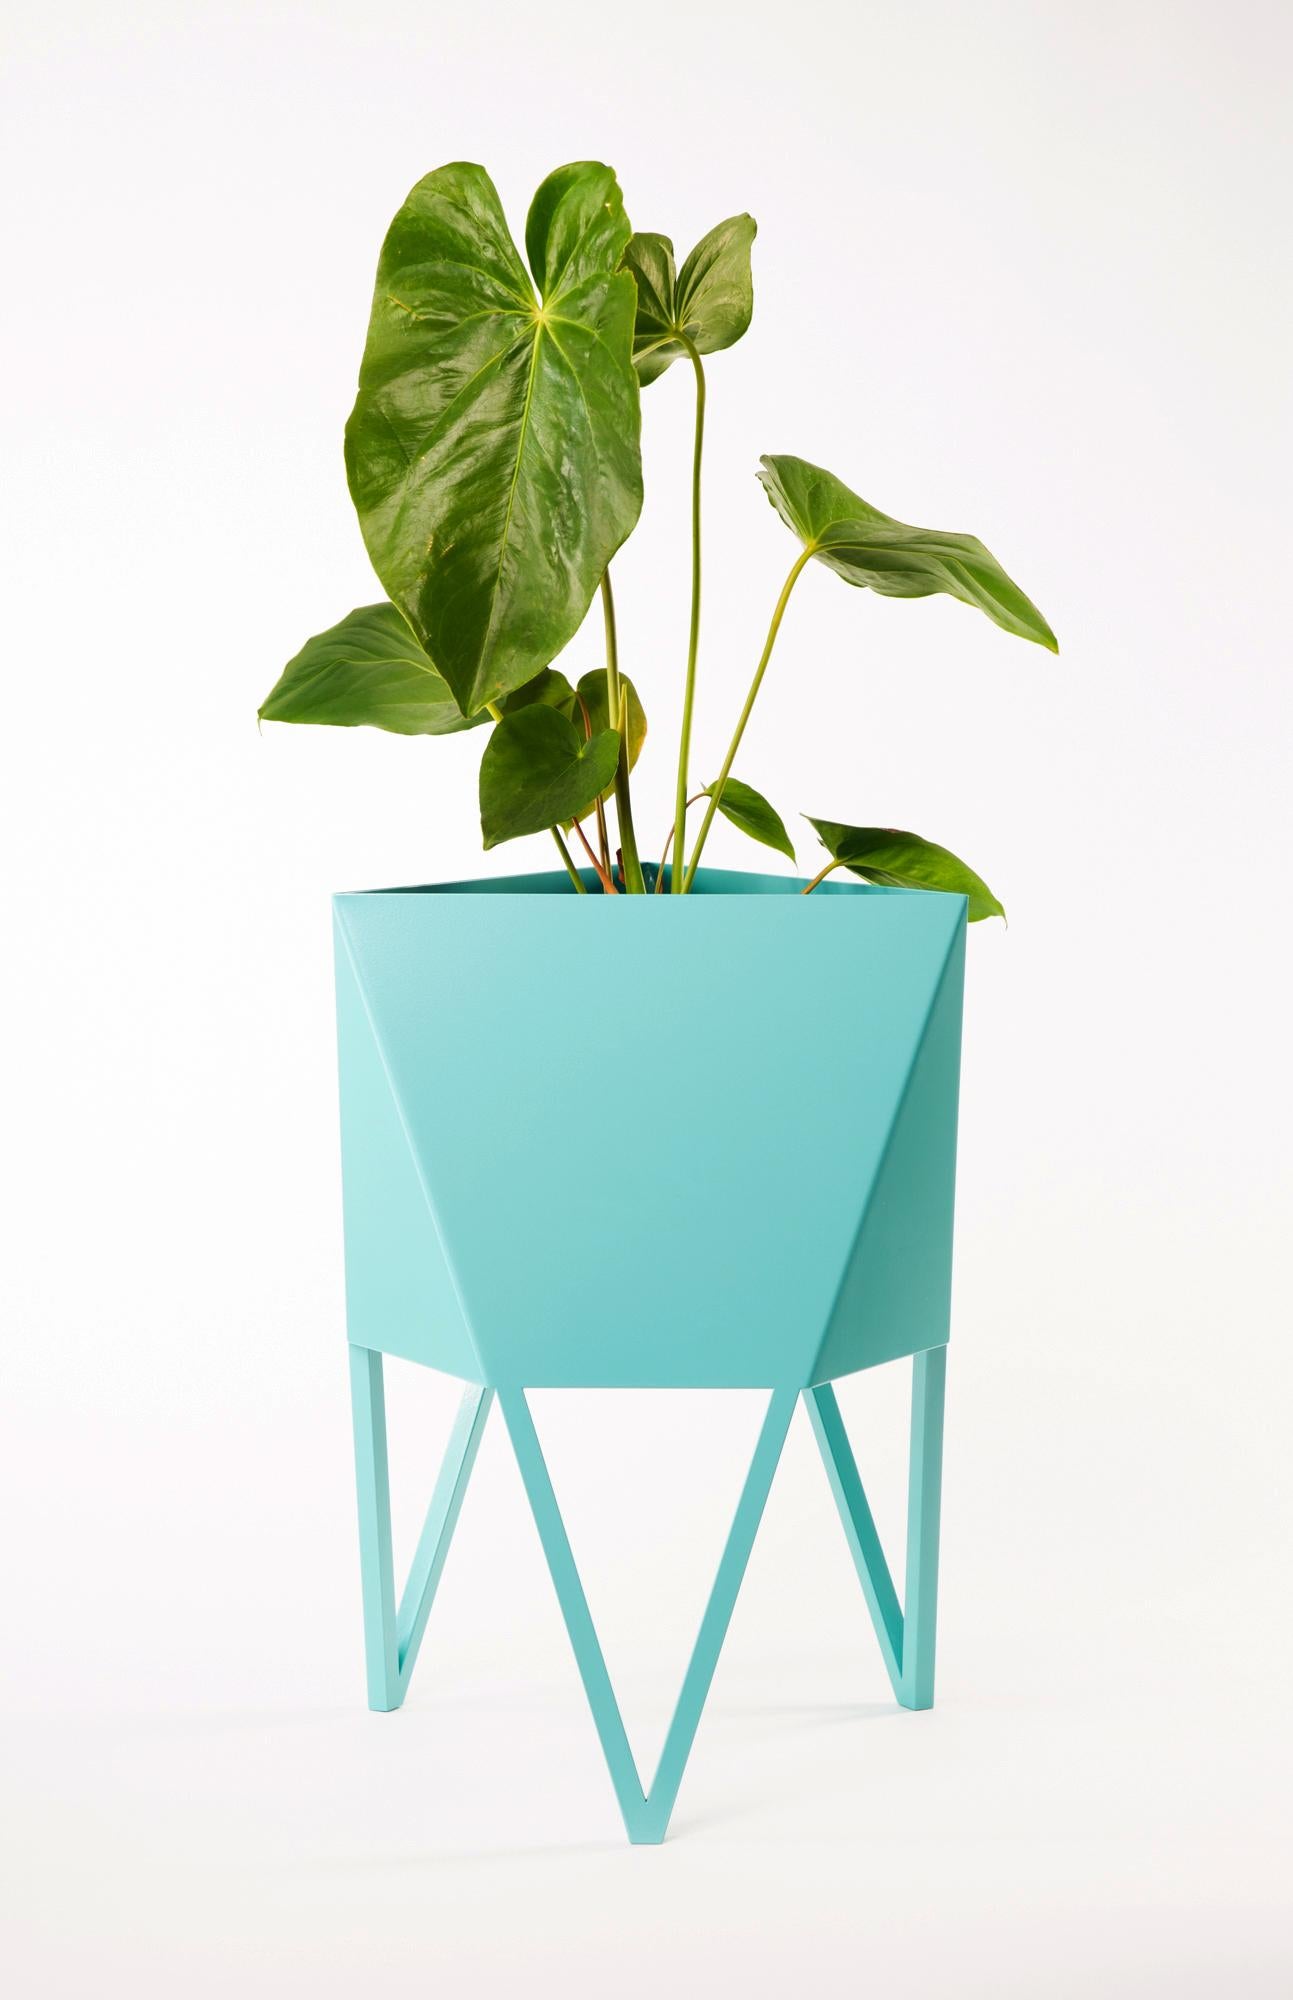 Small Deca Planter in Mint by Force/Collide, 2020 6